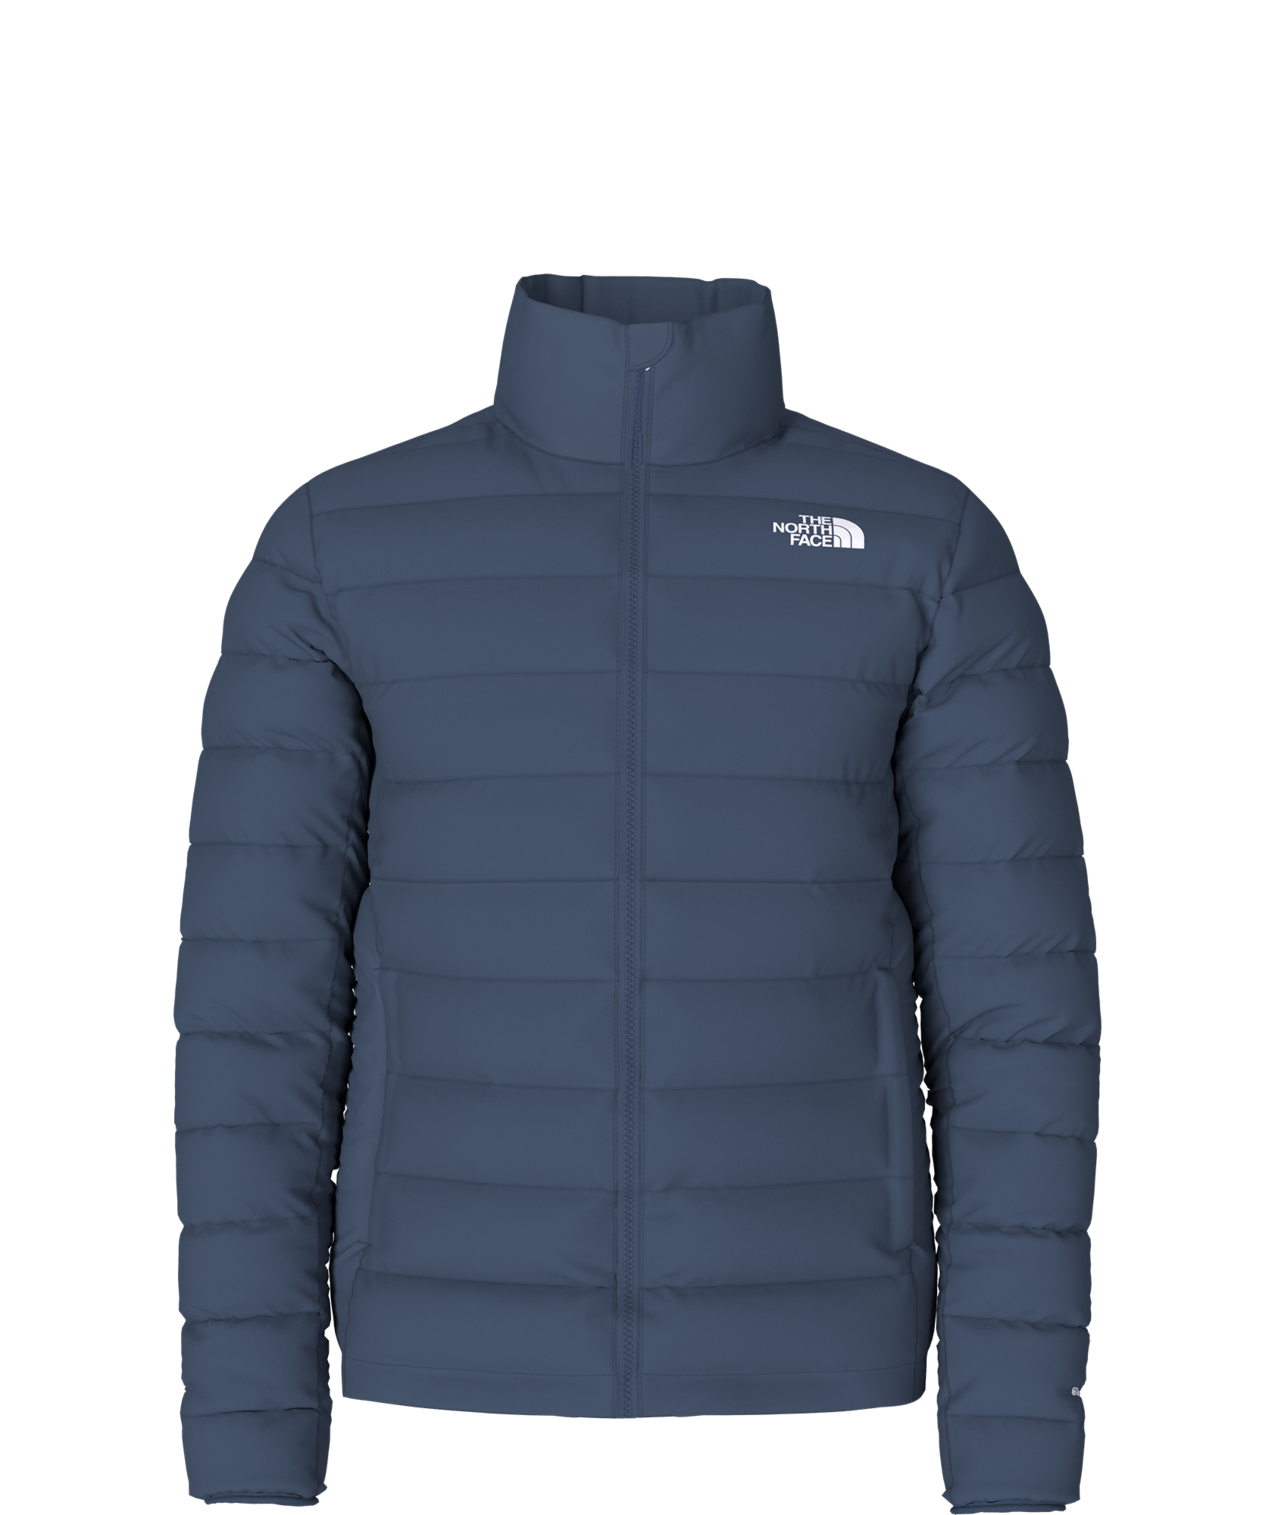 THE NORTH FACE Men's Belleview Stretch Down Jacket, Meld Grey, Small at   Men's Clothing store